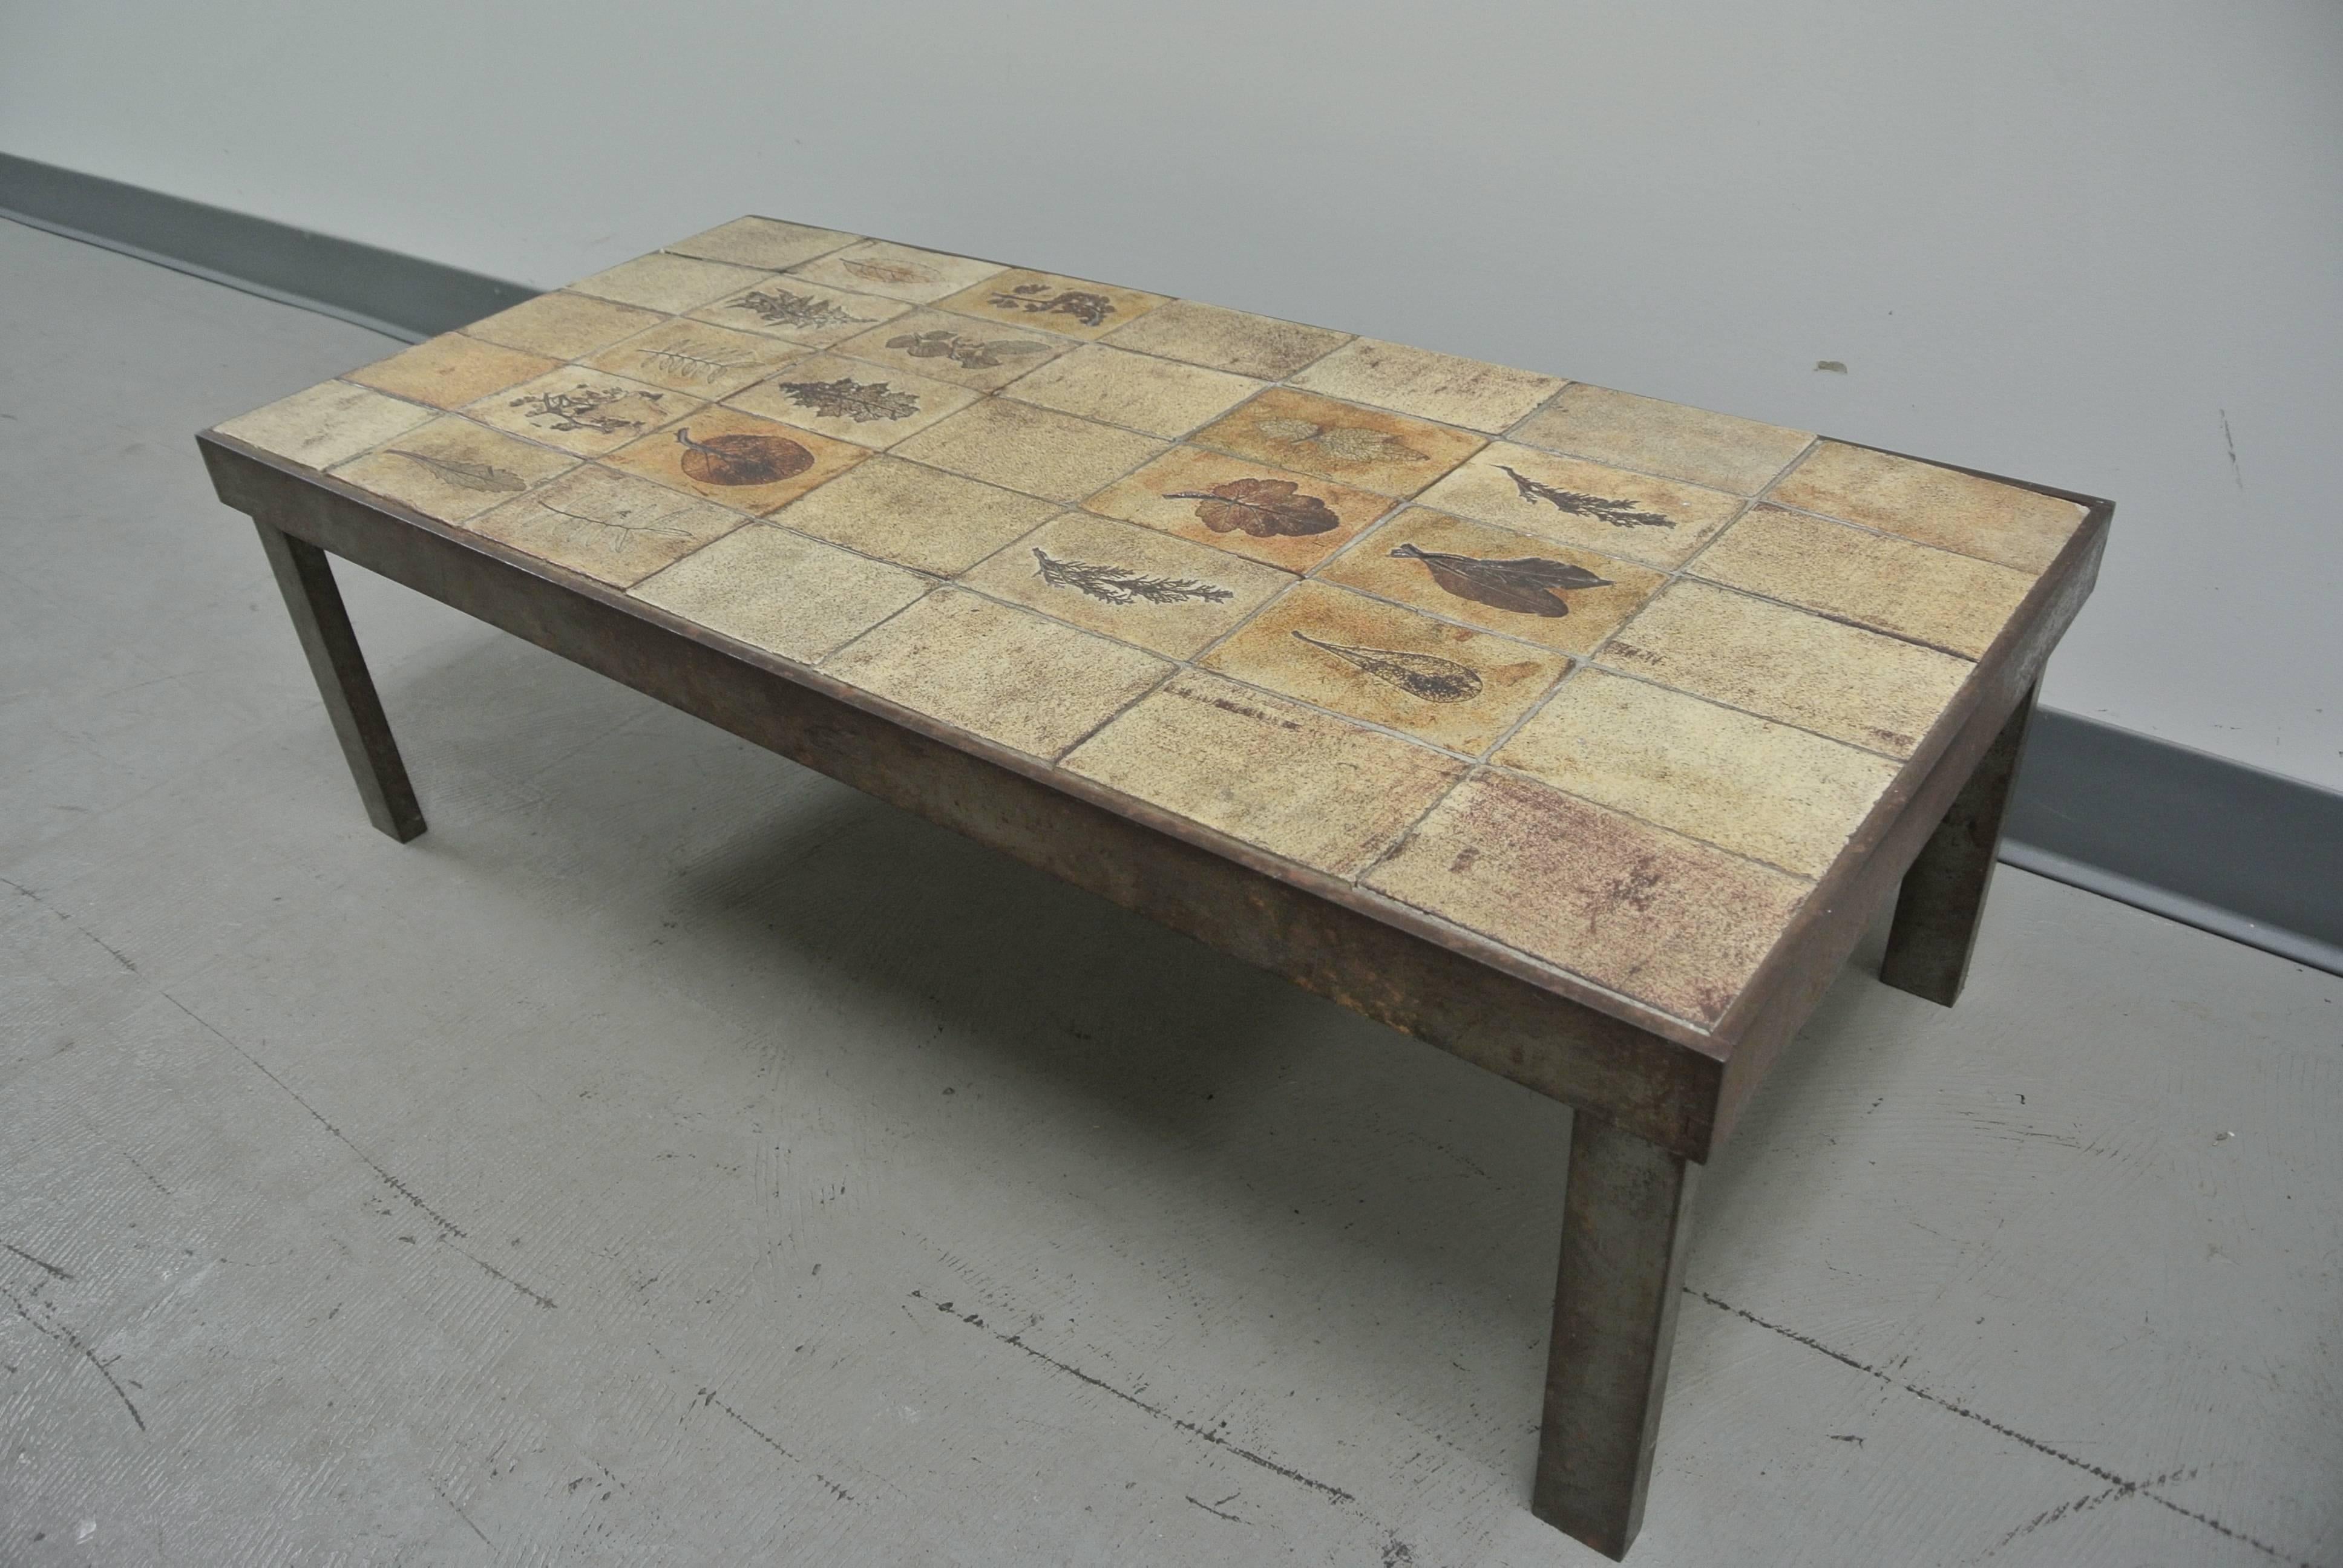 Metal and Tile Coffee Table w. Garrigue Tiles by Roger Capron